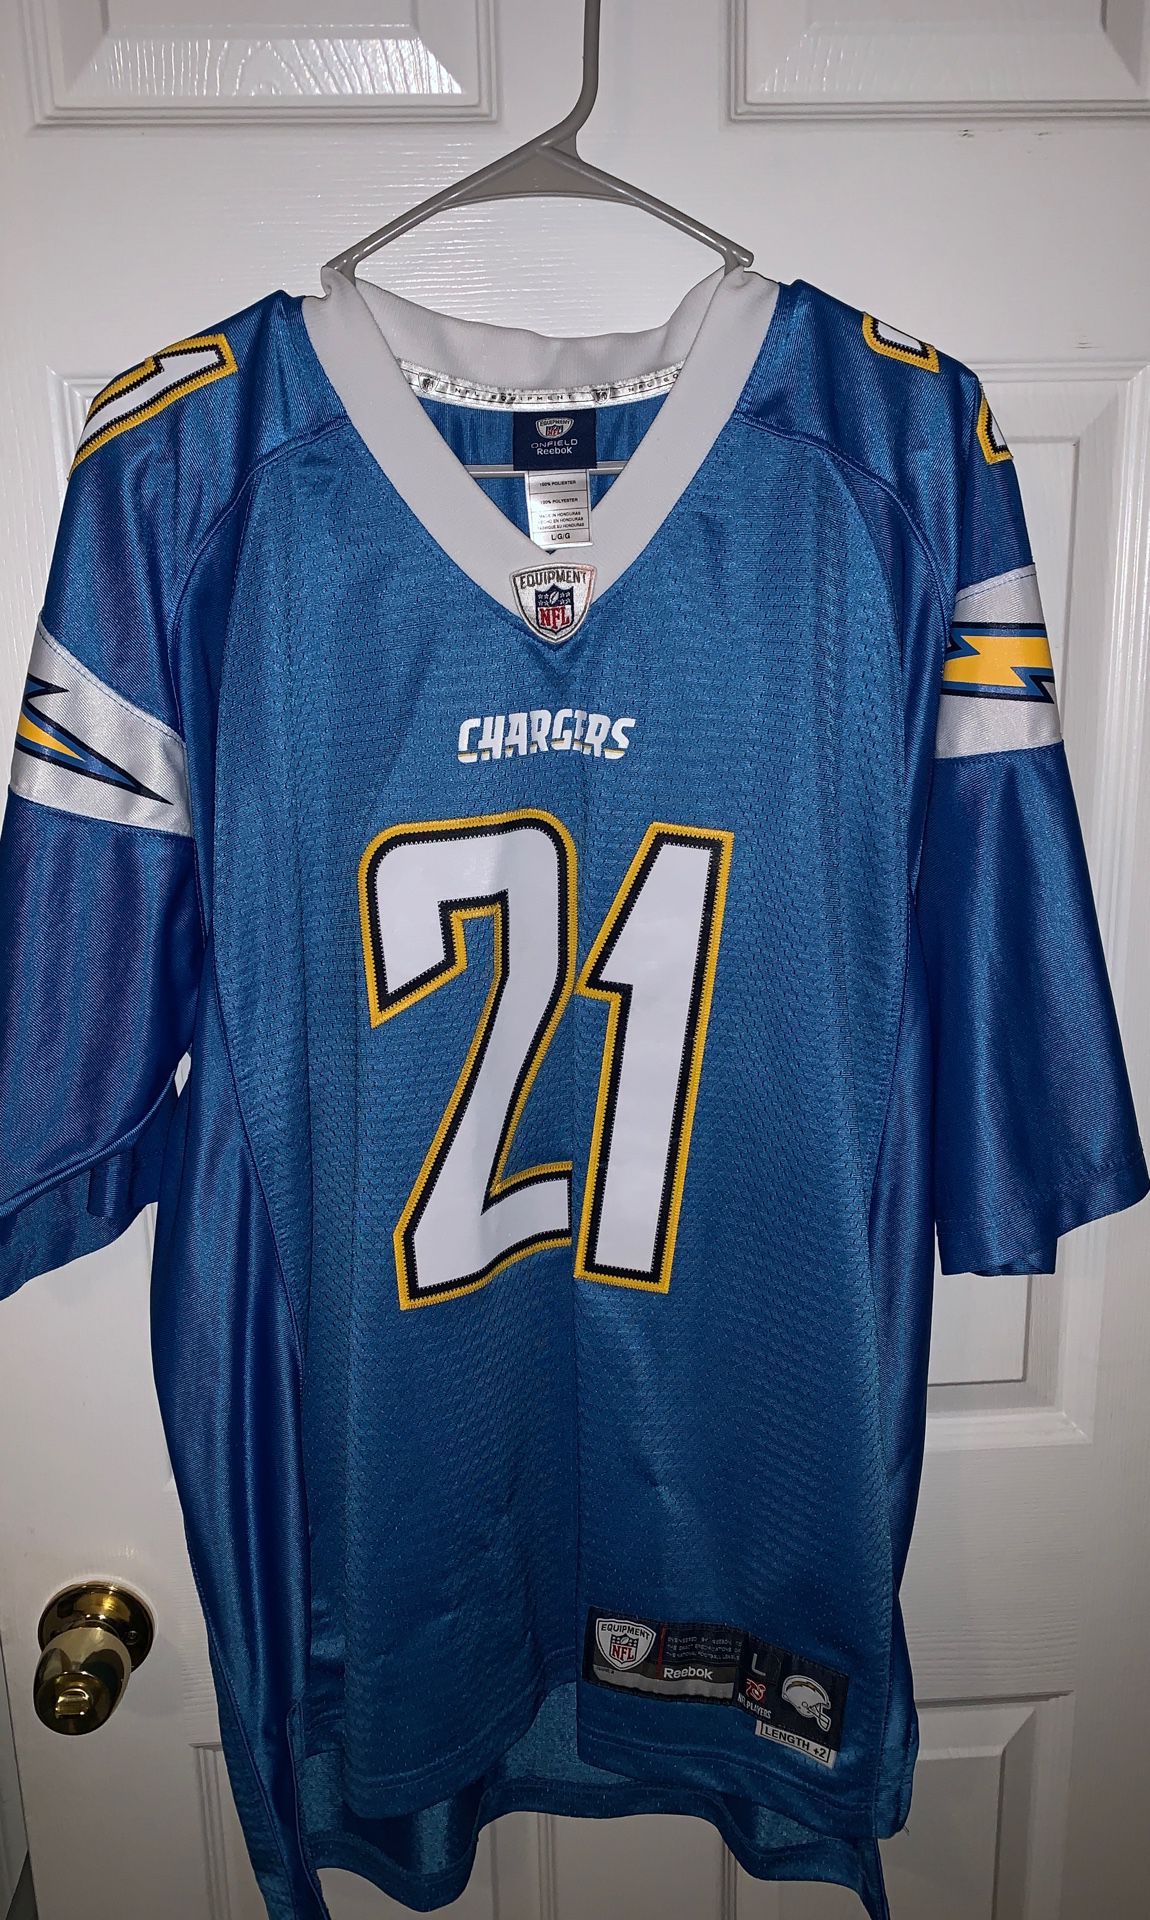 NFL Chargers Large jersey